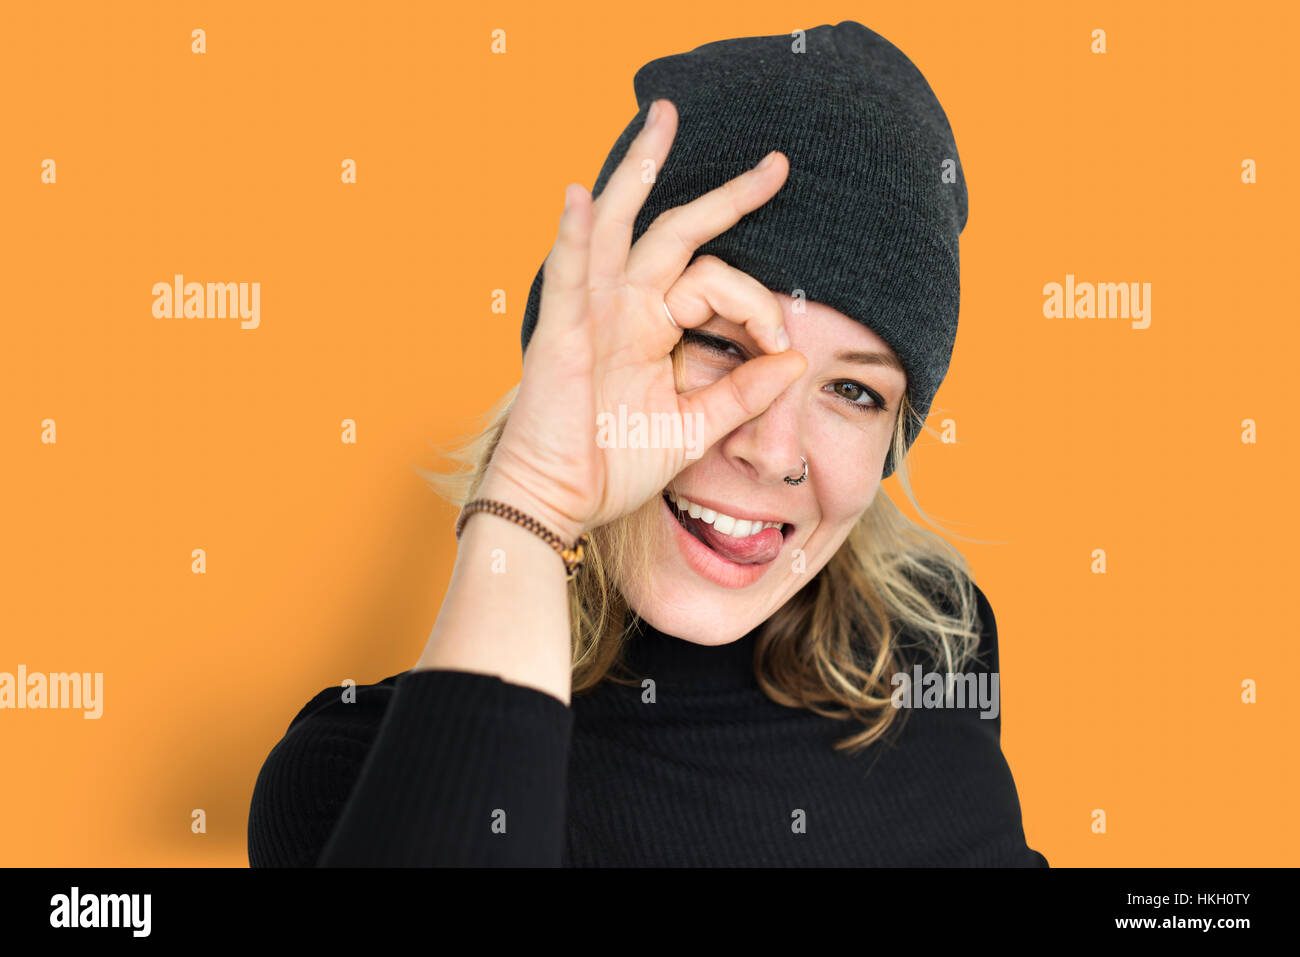 Woman Smiling Happiness Funny Portrait Concept Stock Photo